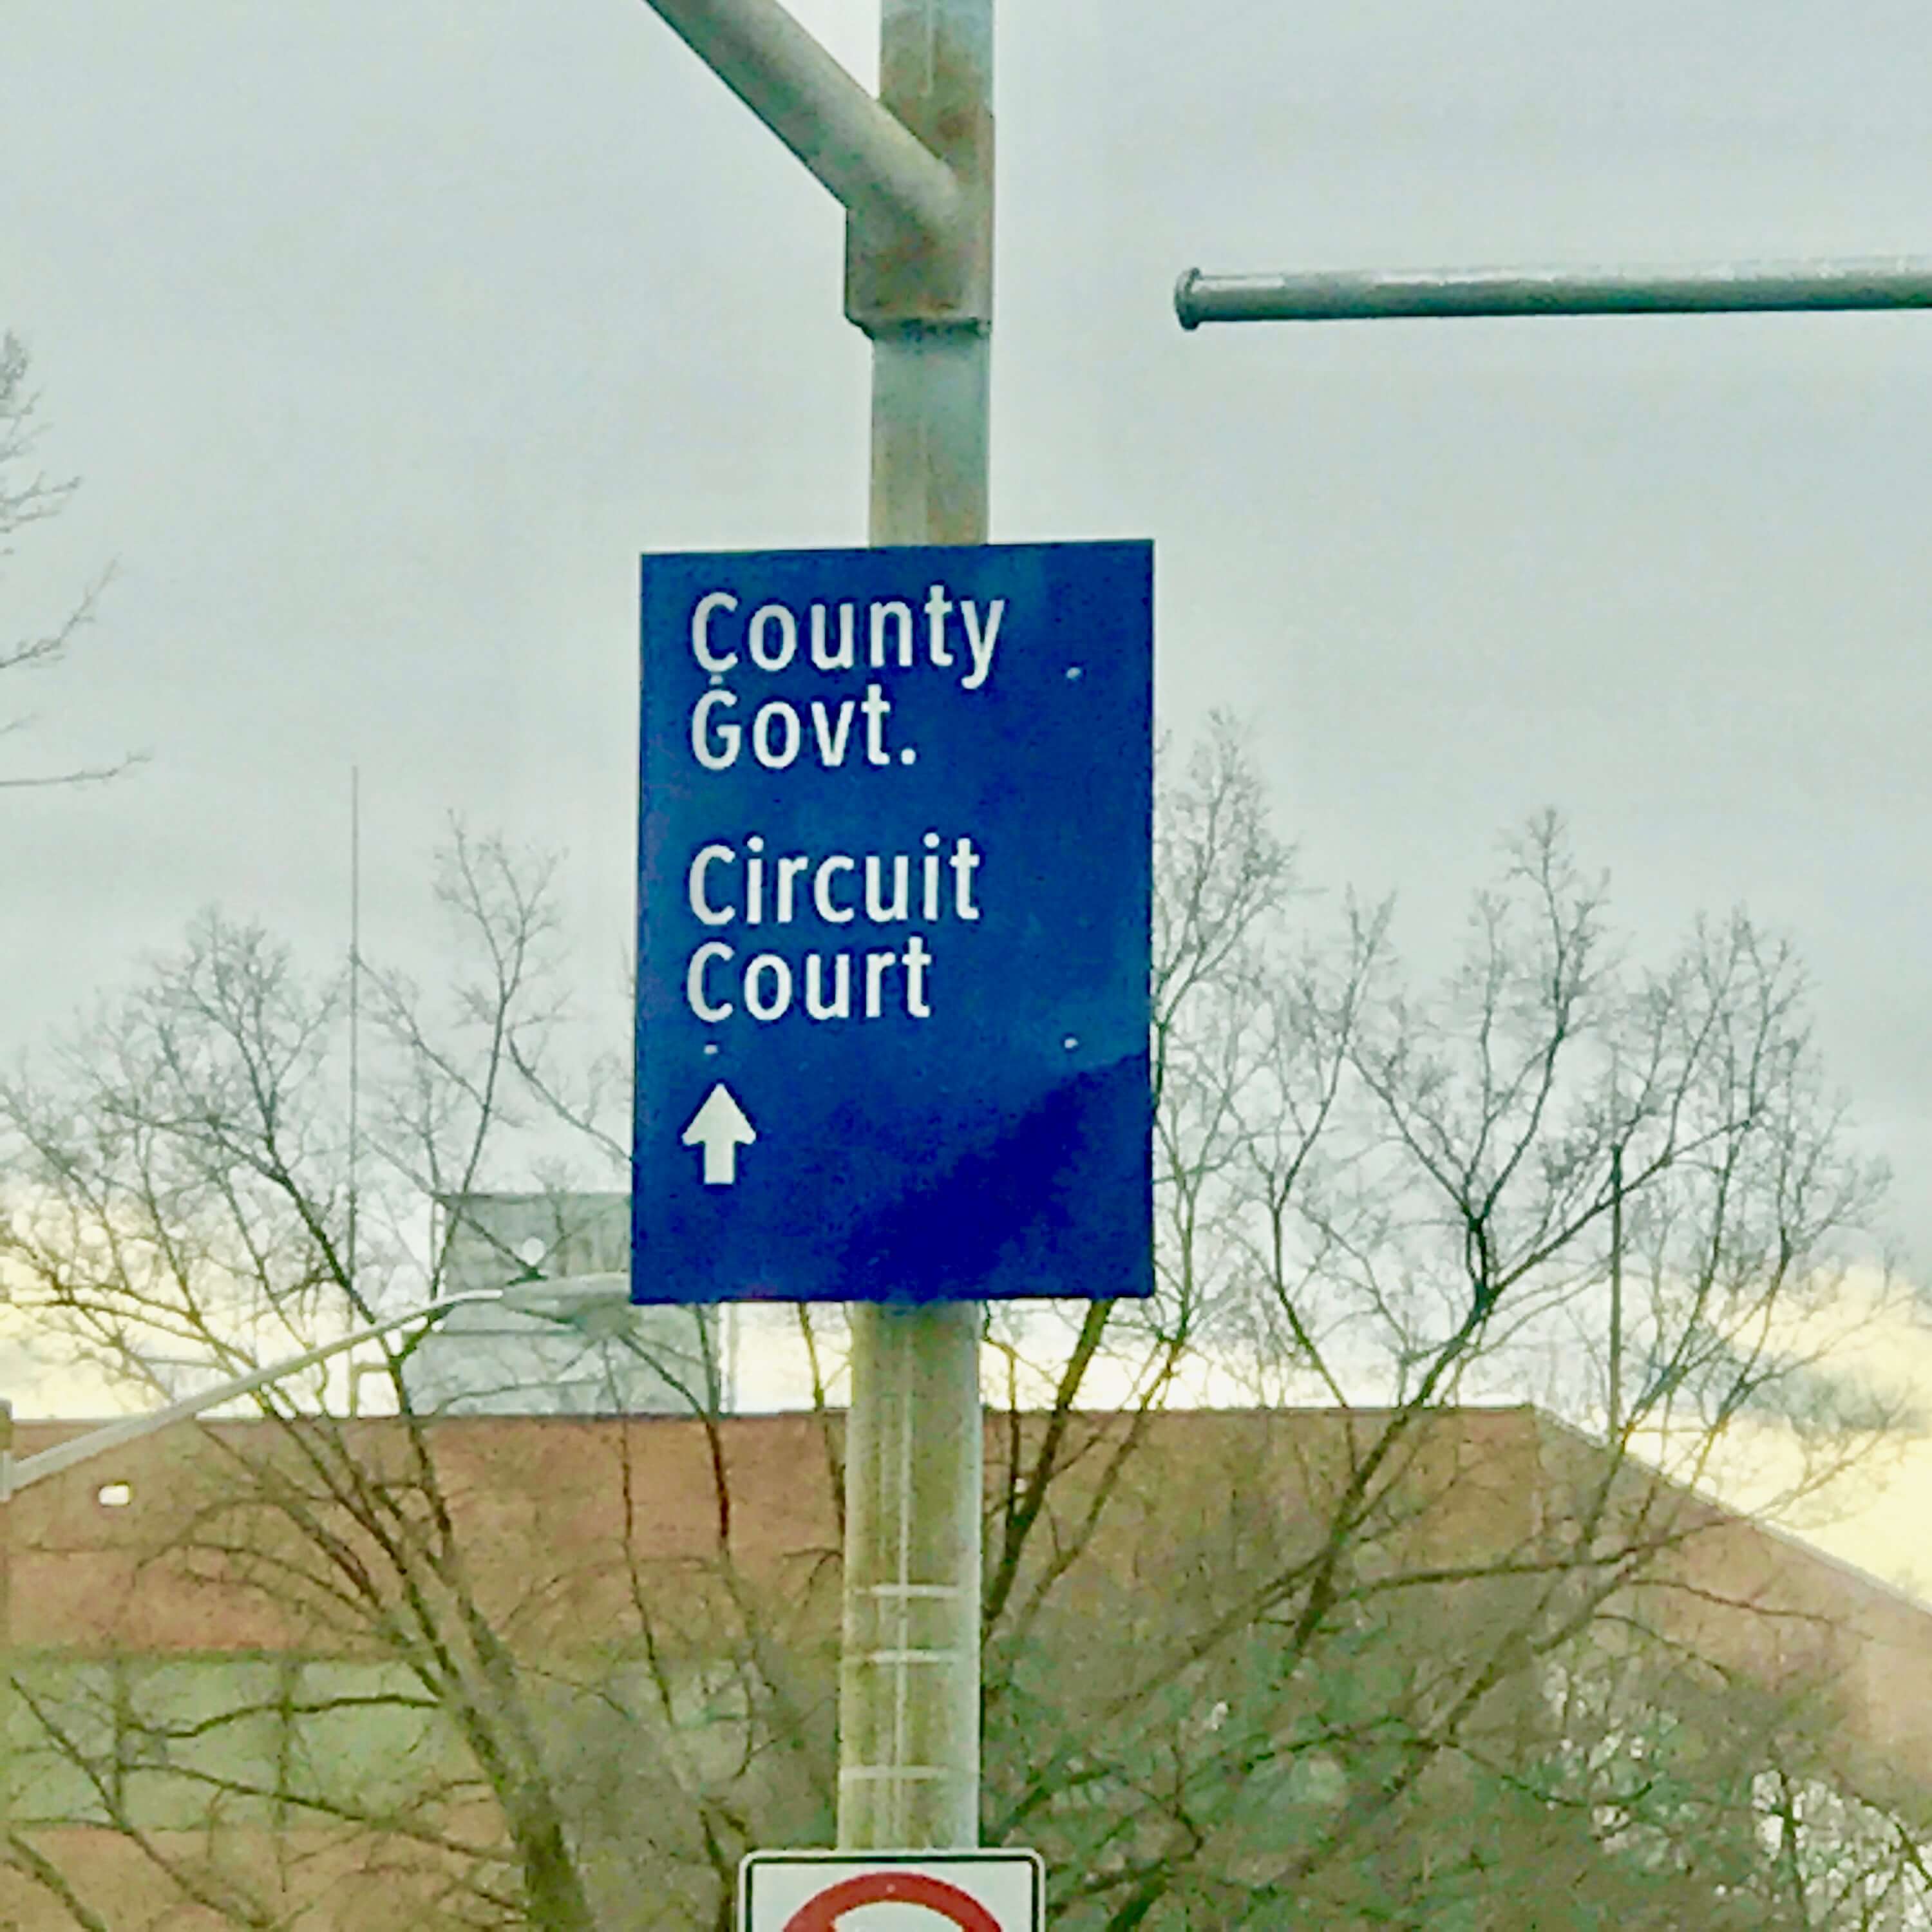 Located Near Circuit Court for BALTIMORE COUNTY